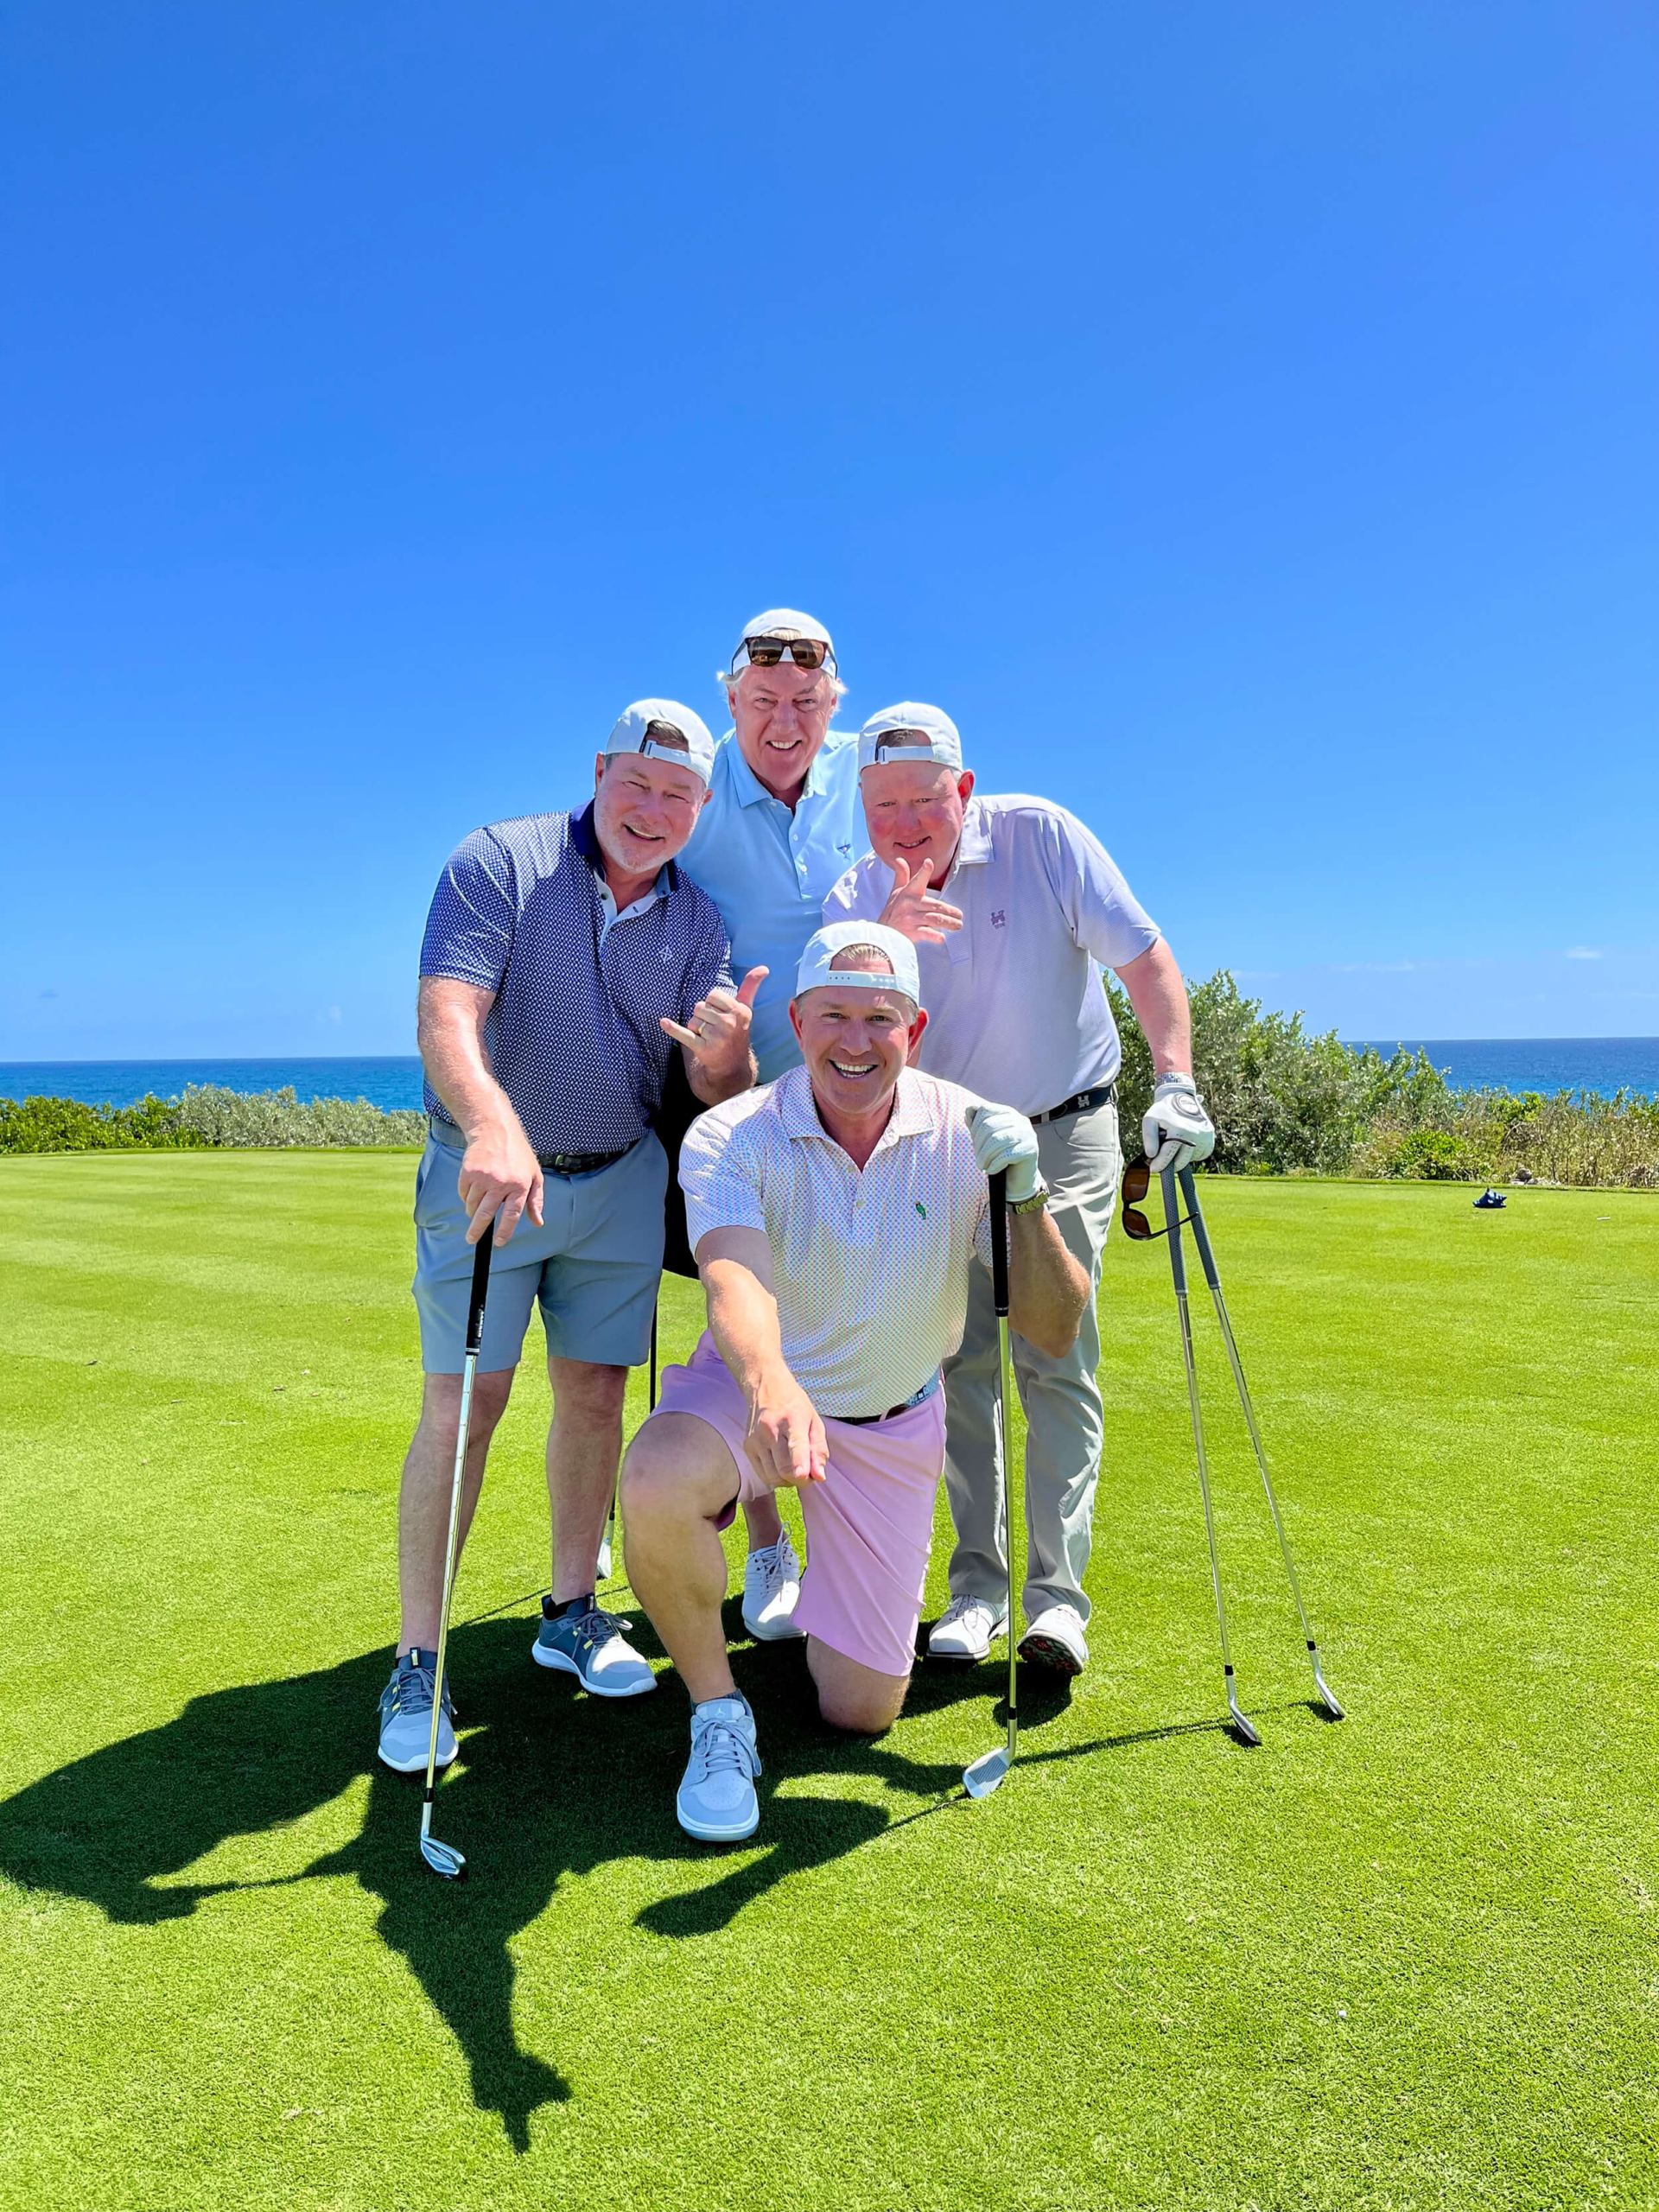 Group of golfers sharing a joyful moment on The Abaco Club golf course with scenic coastal views